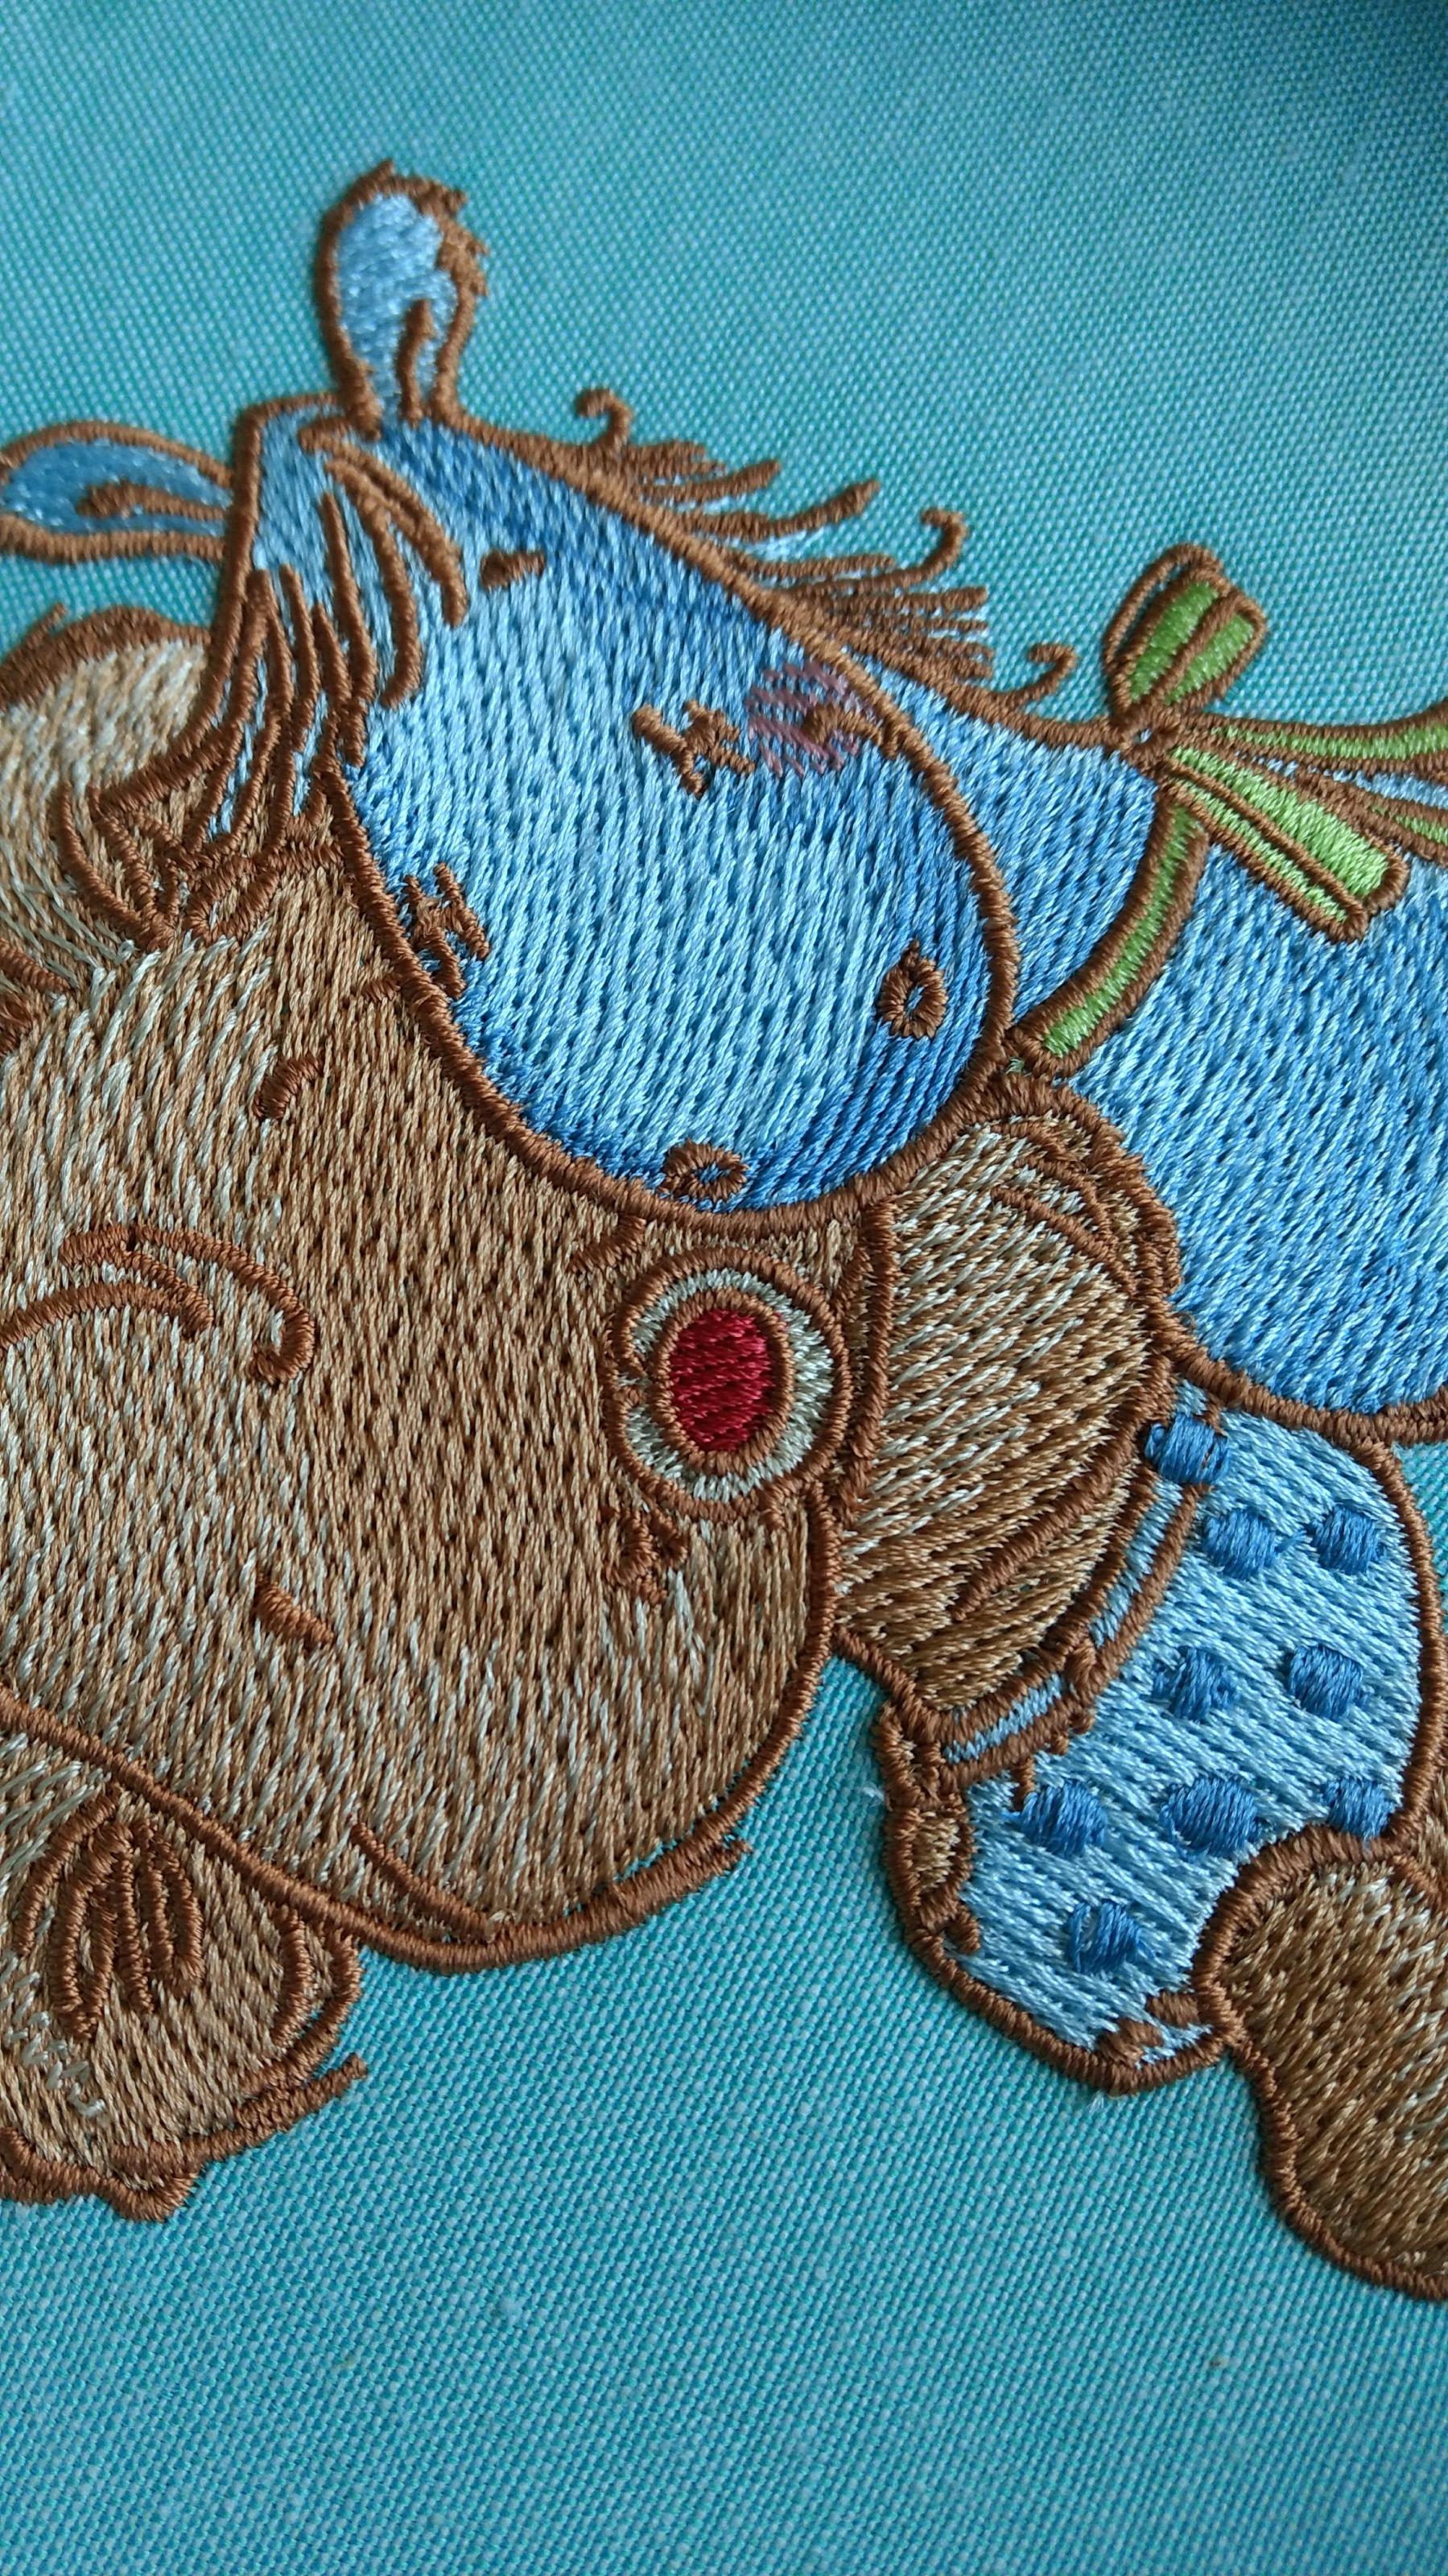 Teddy bear with pony embroidered design